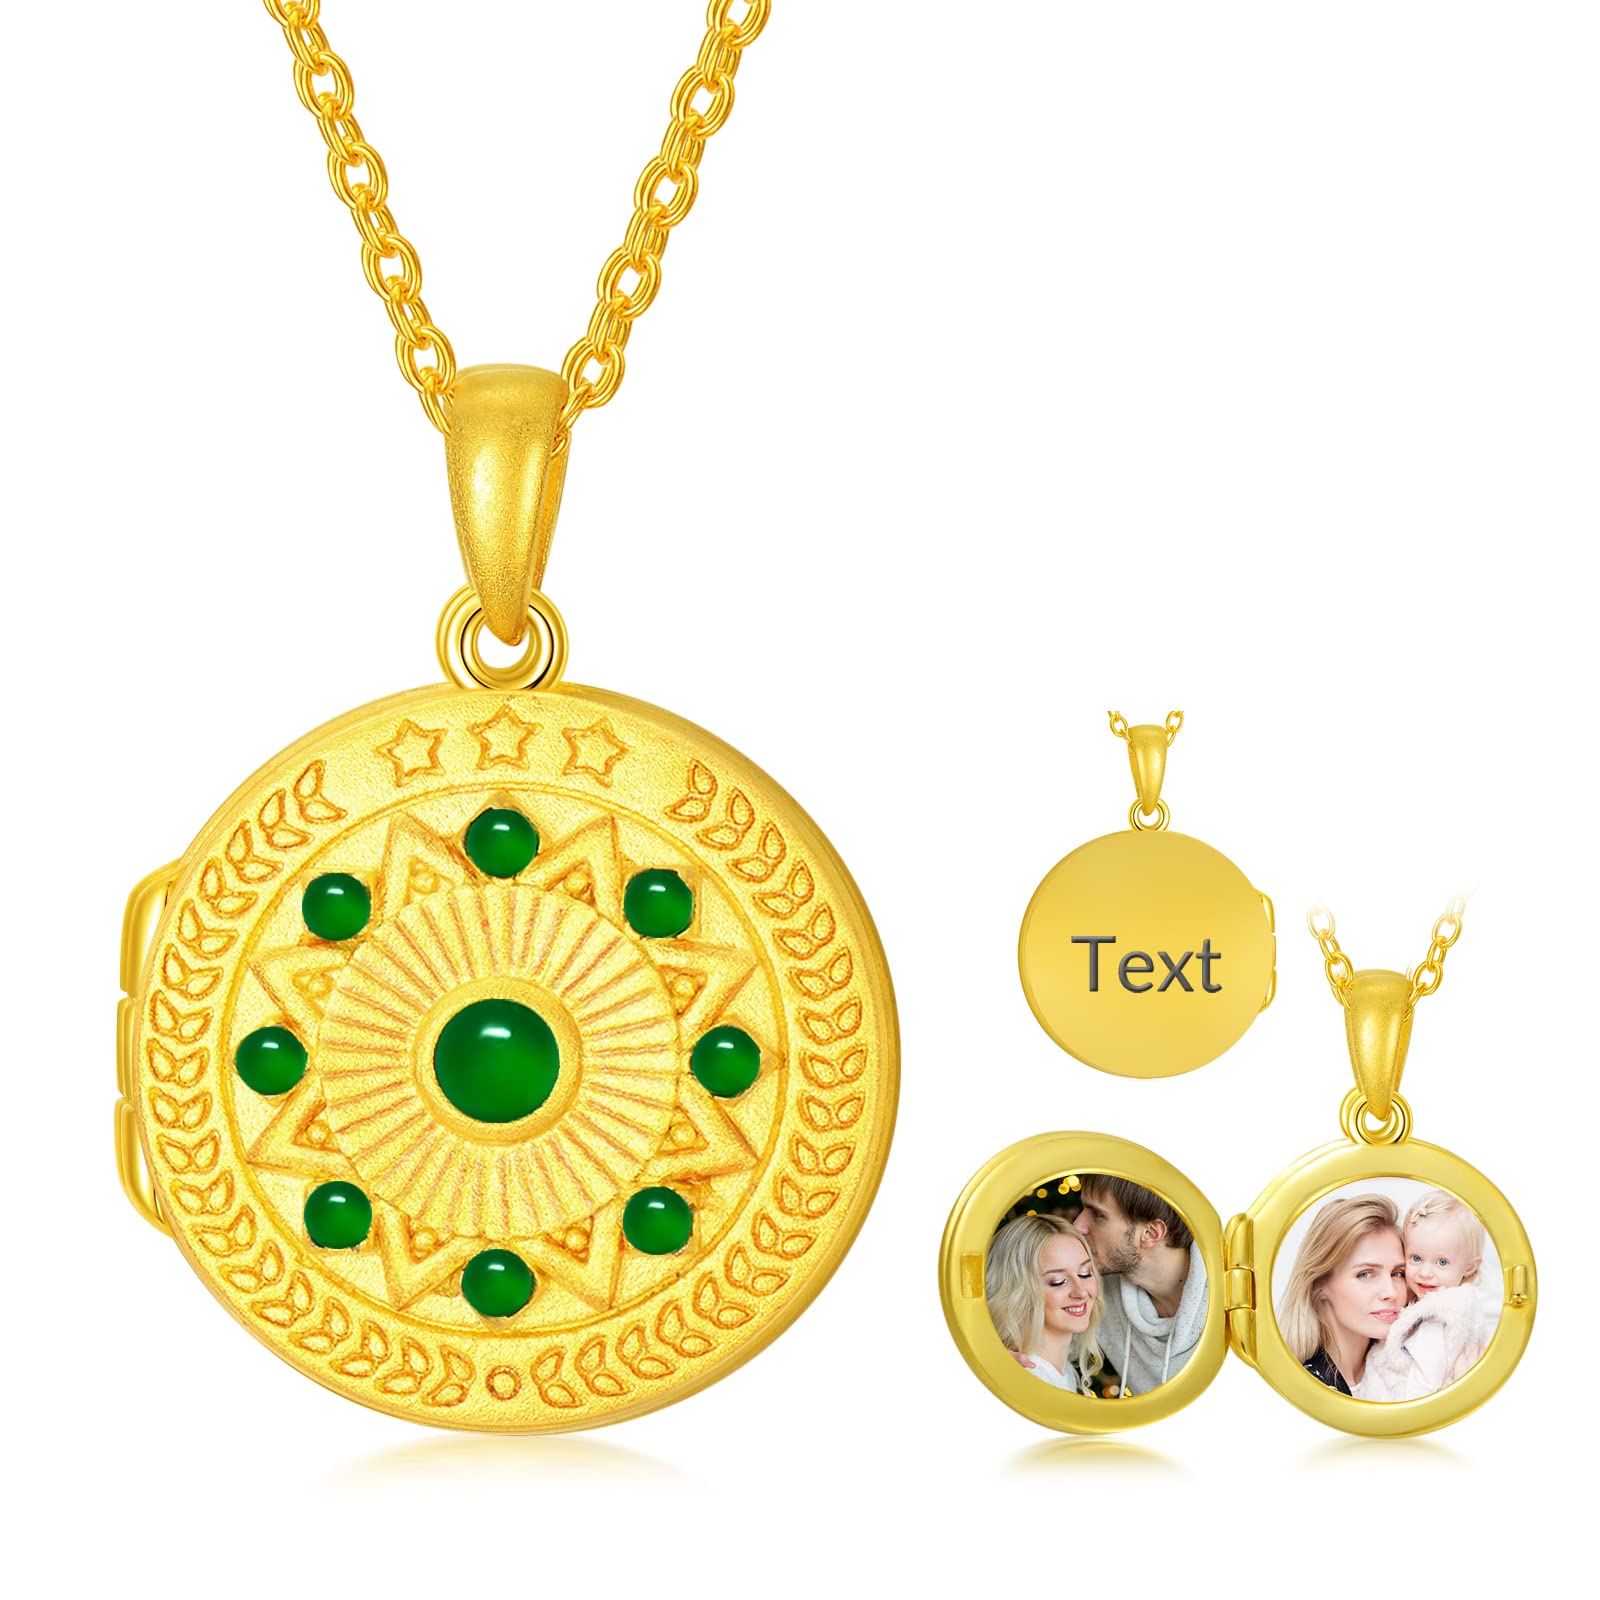 SOULMEET Personalized 10K 14K 18K Gold/Plated Gold Round Emerald Locket Necklace That Holds Pictures Custom Natural Gemstone Locket Pendant Necklace with Real Gold Chain Gift for Wome